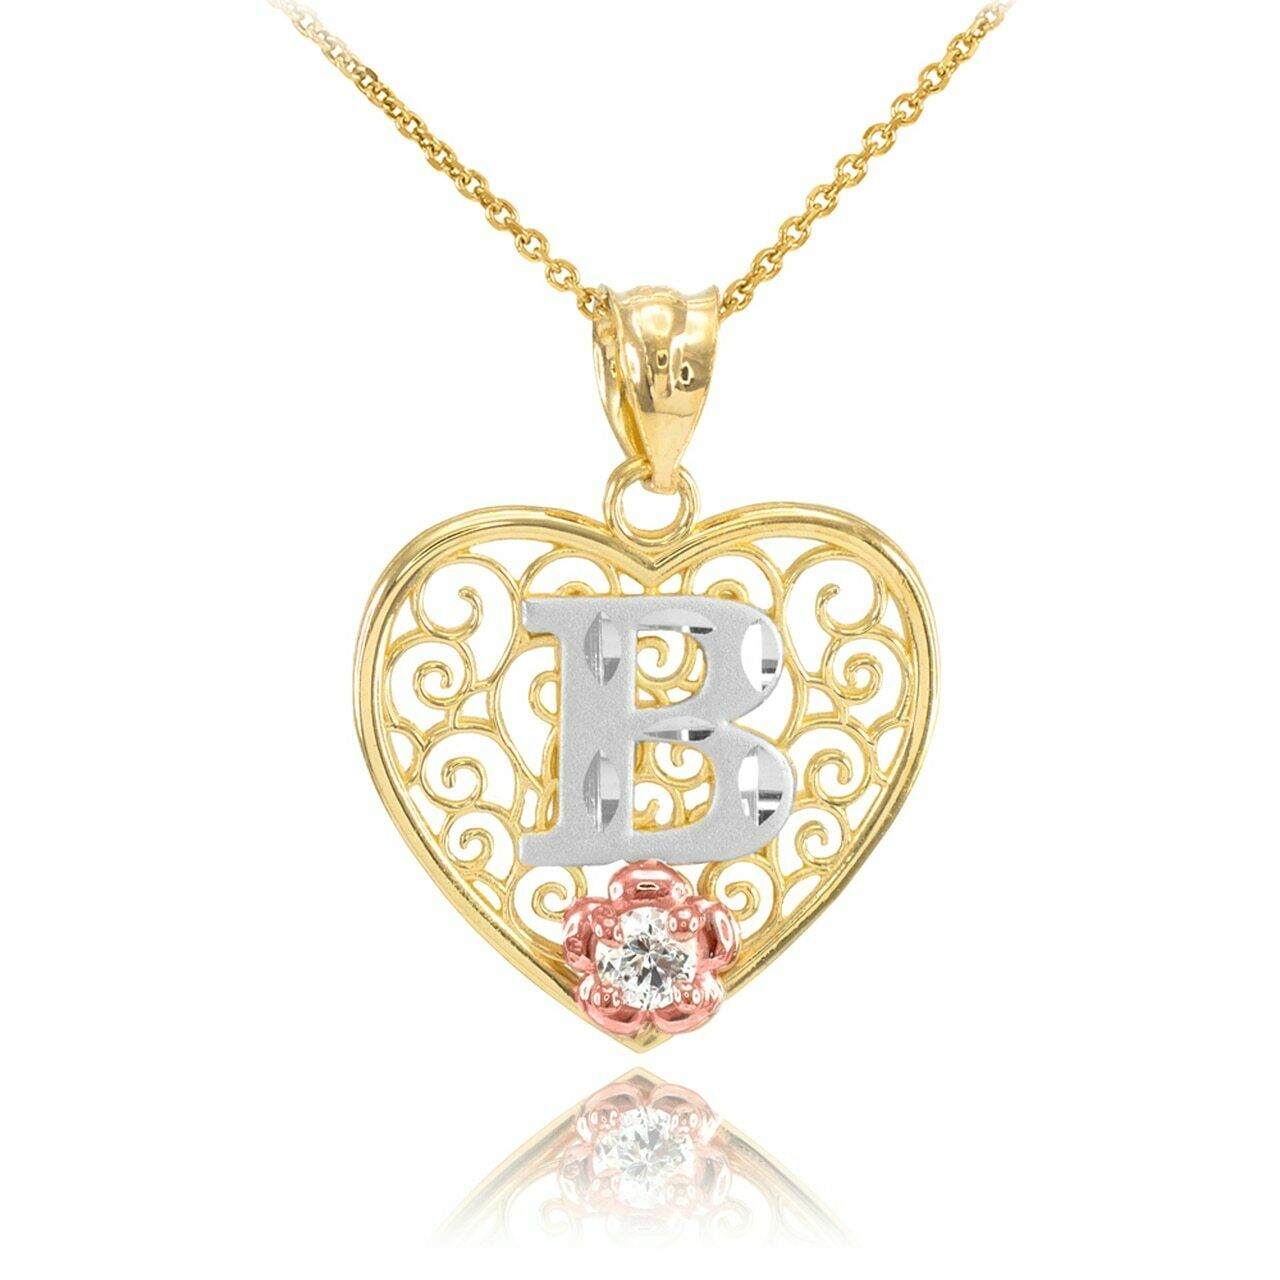 10k Solid Gold Initial Letter B Heart Filigree CZ Pendant Necklace